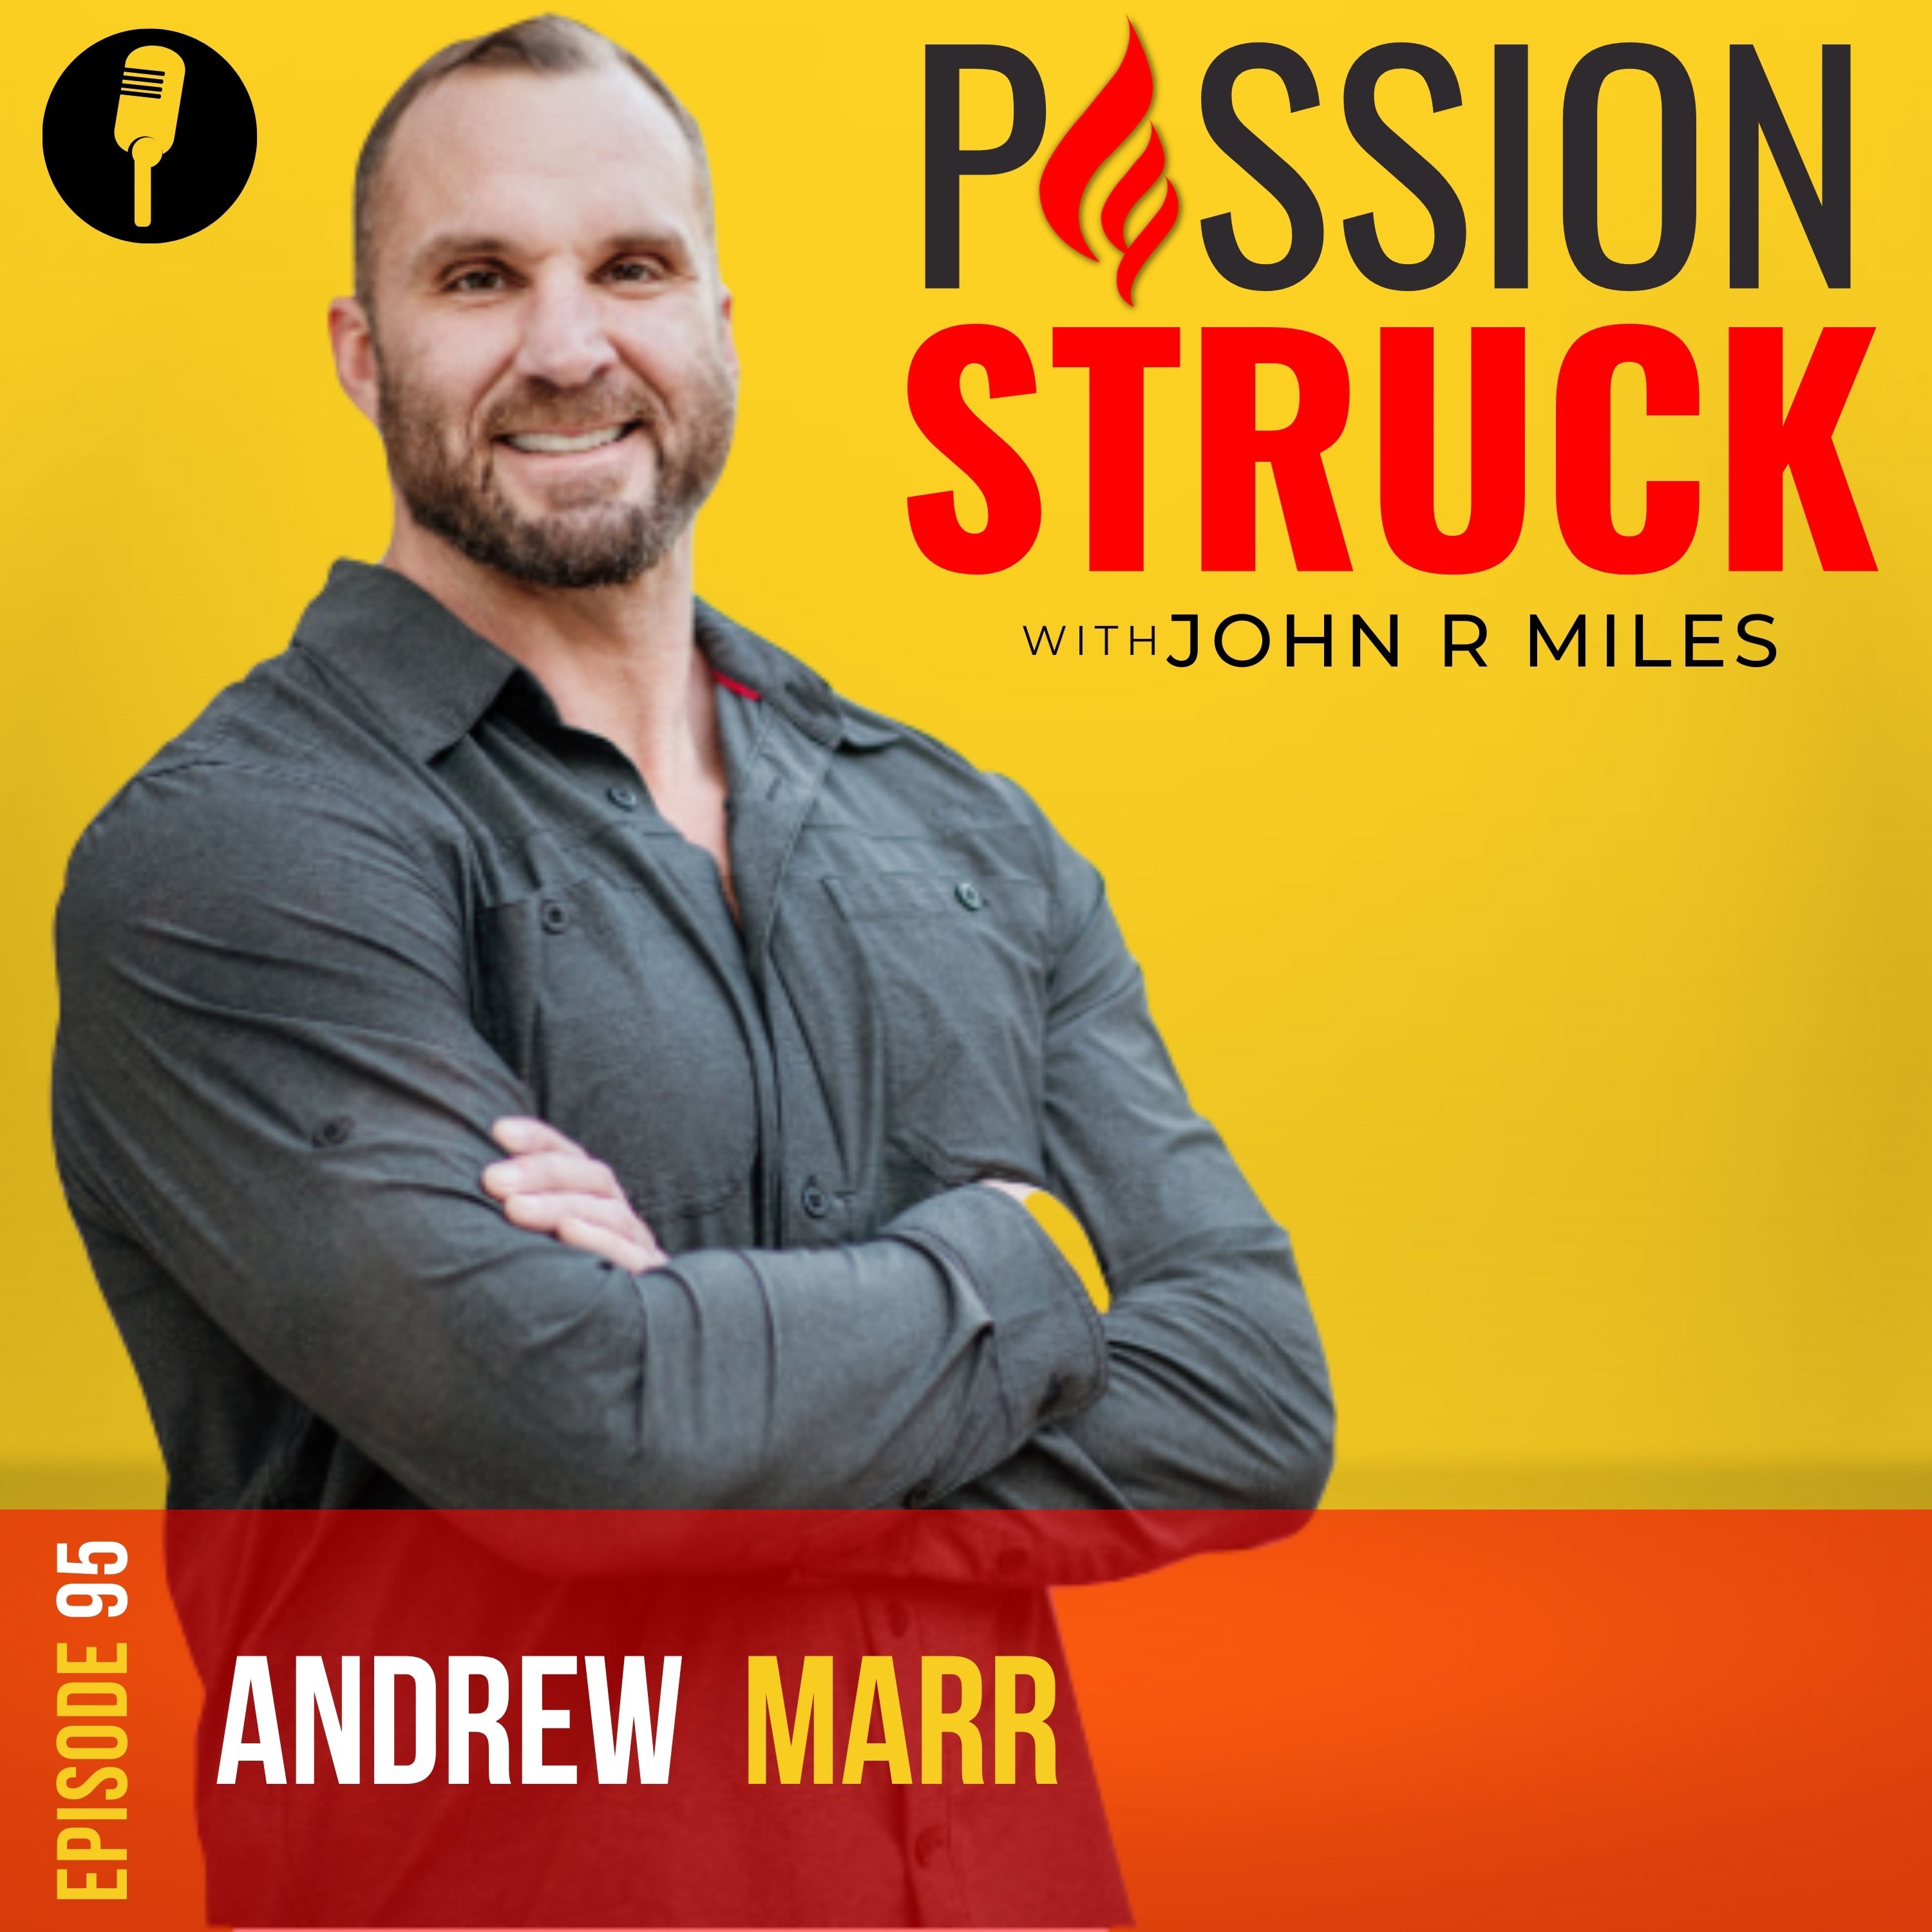 Passion Struck podcast album cover featuring Andrew Marr and his never quit mentality